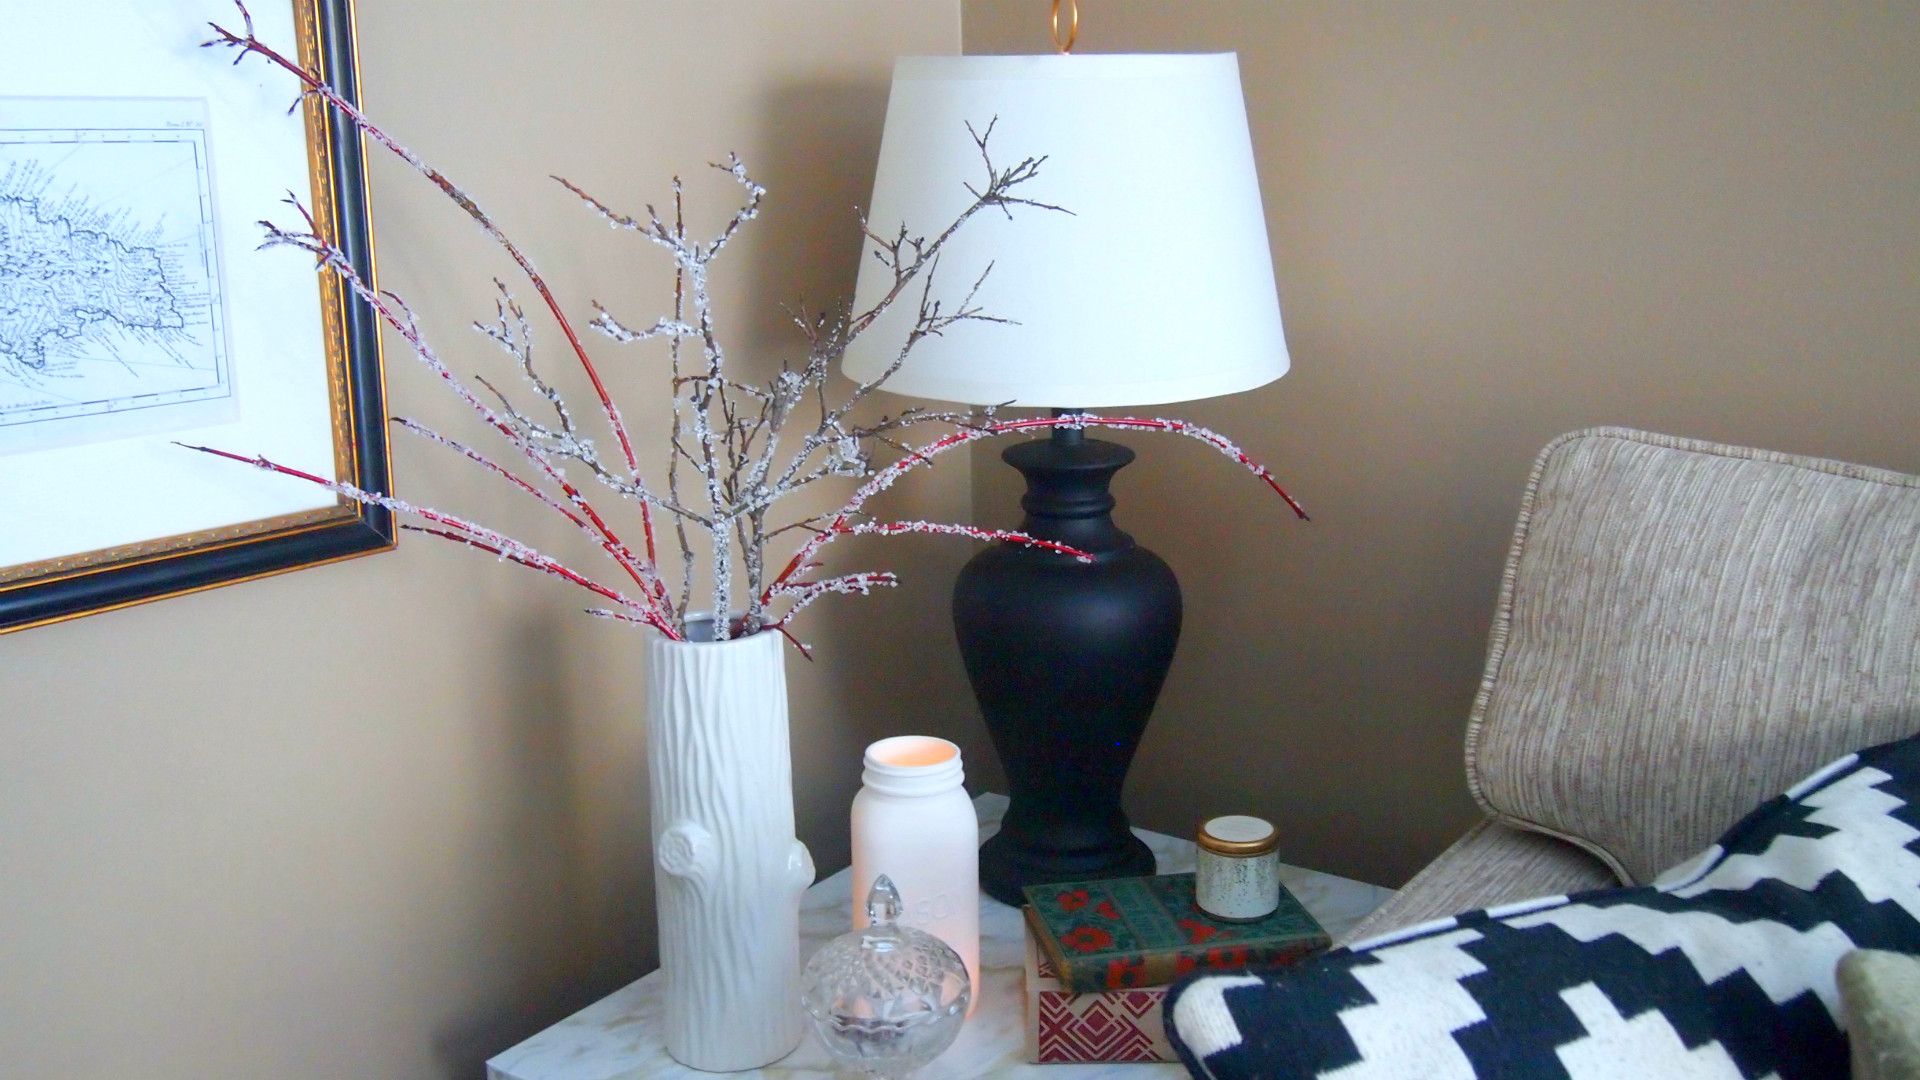 DIY Tree Branch Decor
 Icy looking branches for winter decor that won t break the